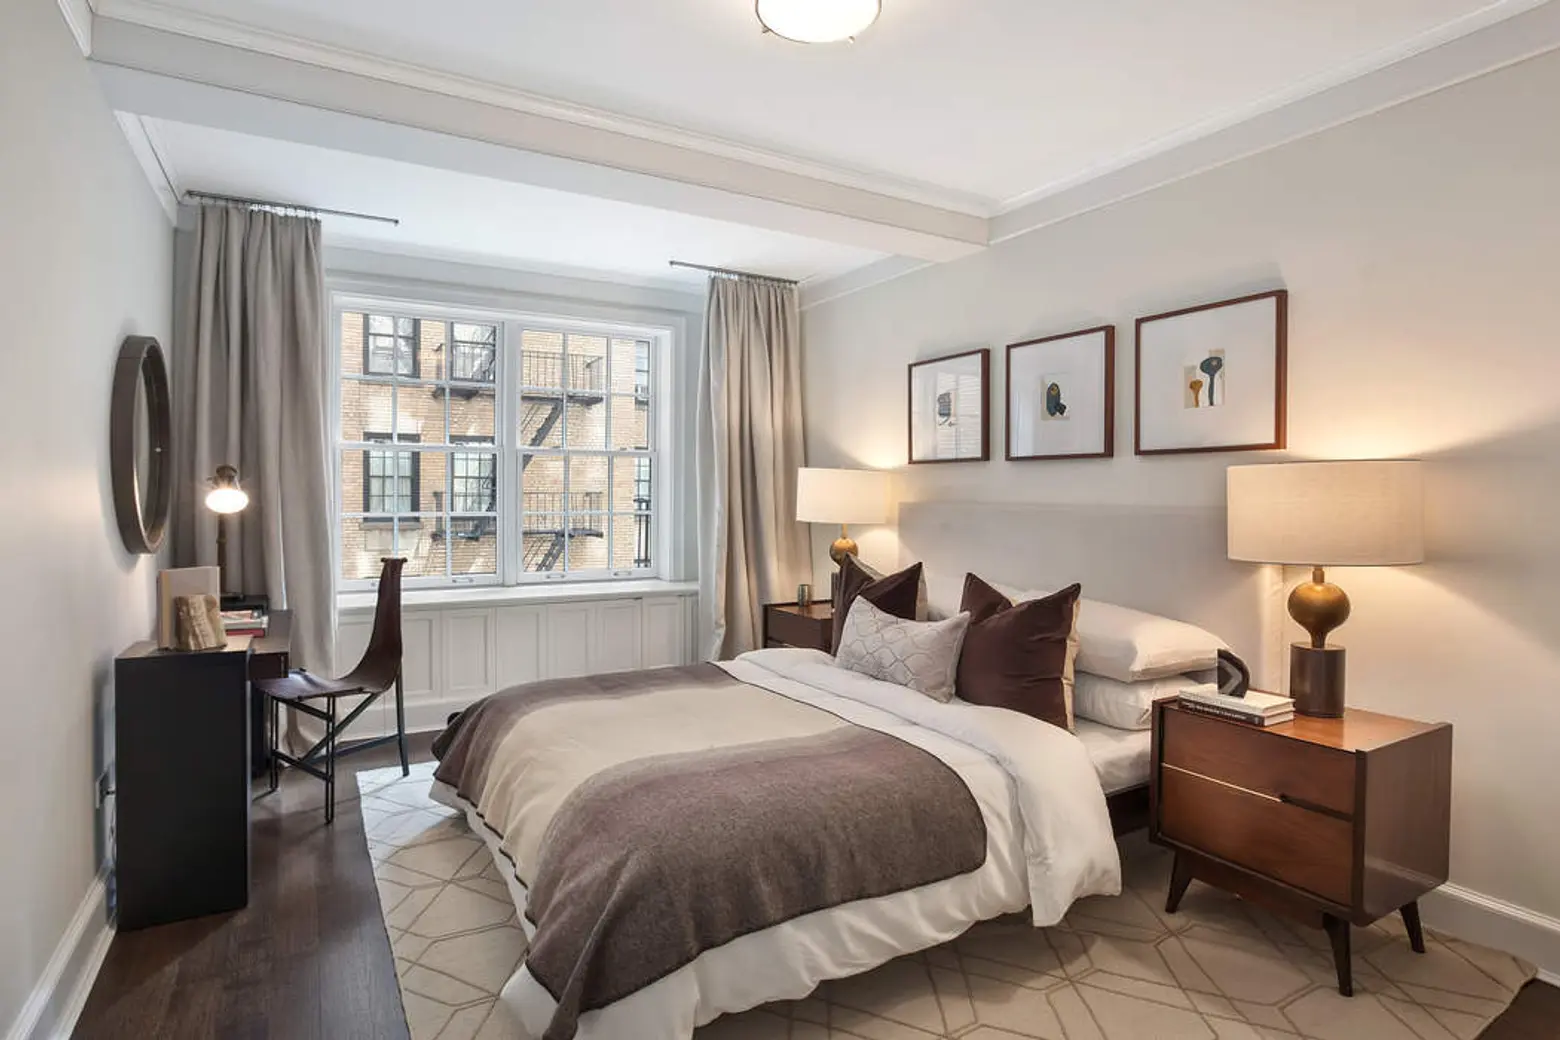 28 east 10th street, joshua charles, celebrities, devonshire house, recently sold